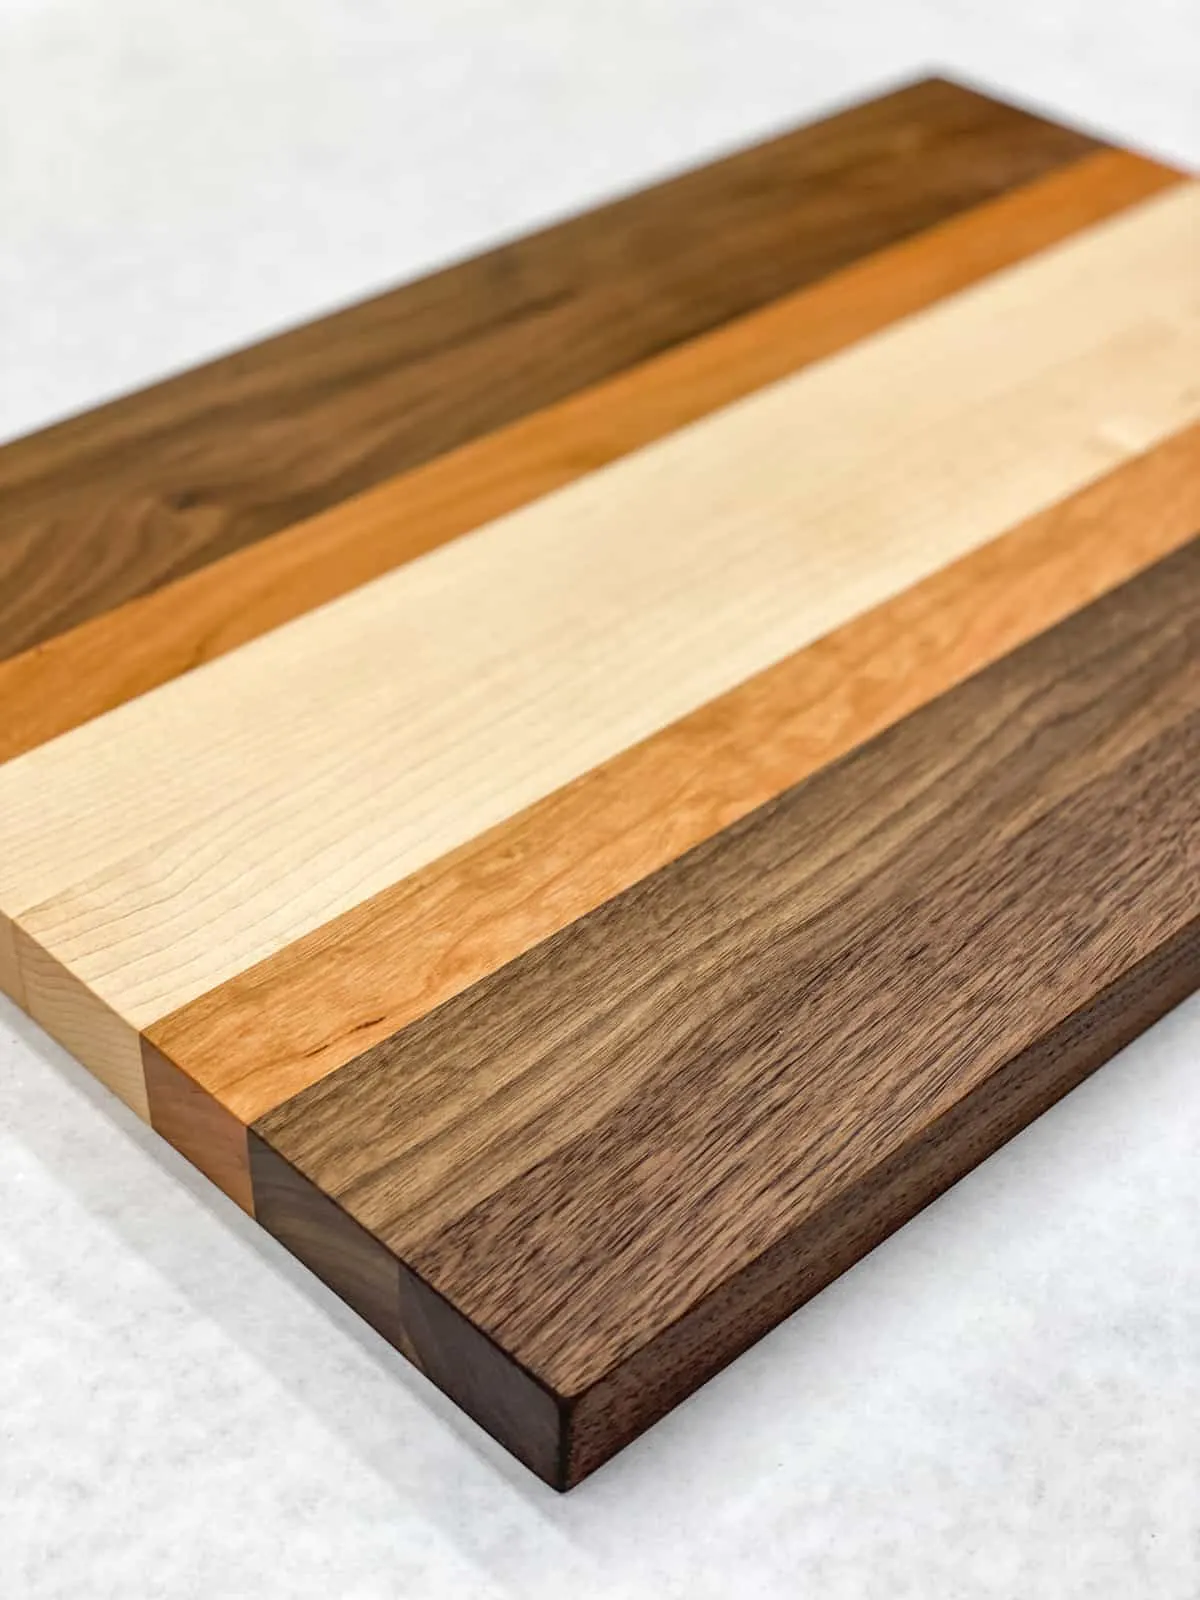 maple, cherry and walnut cutting board made from a kit